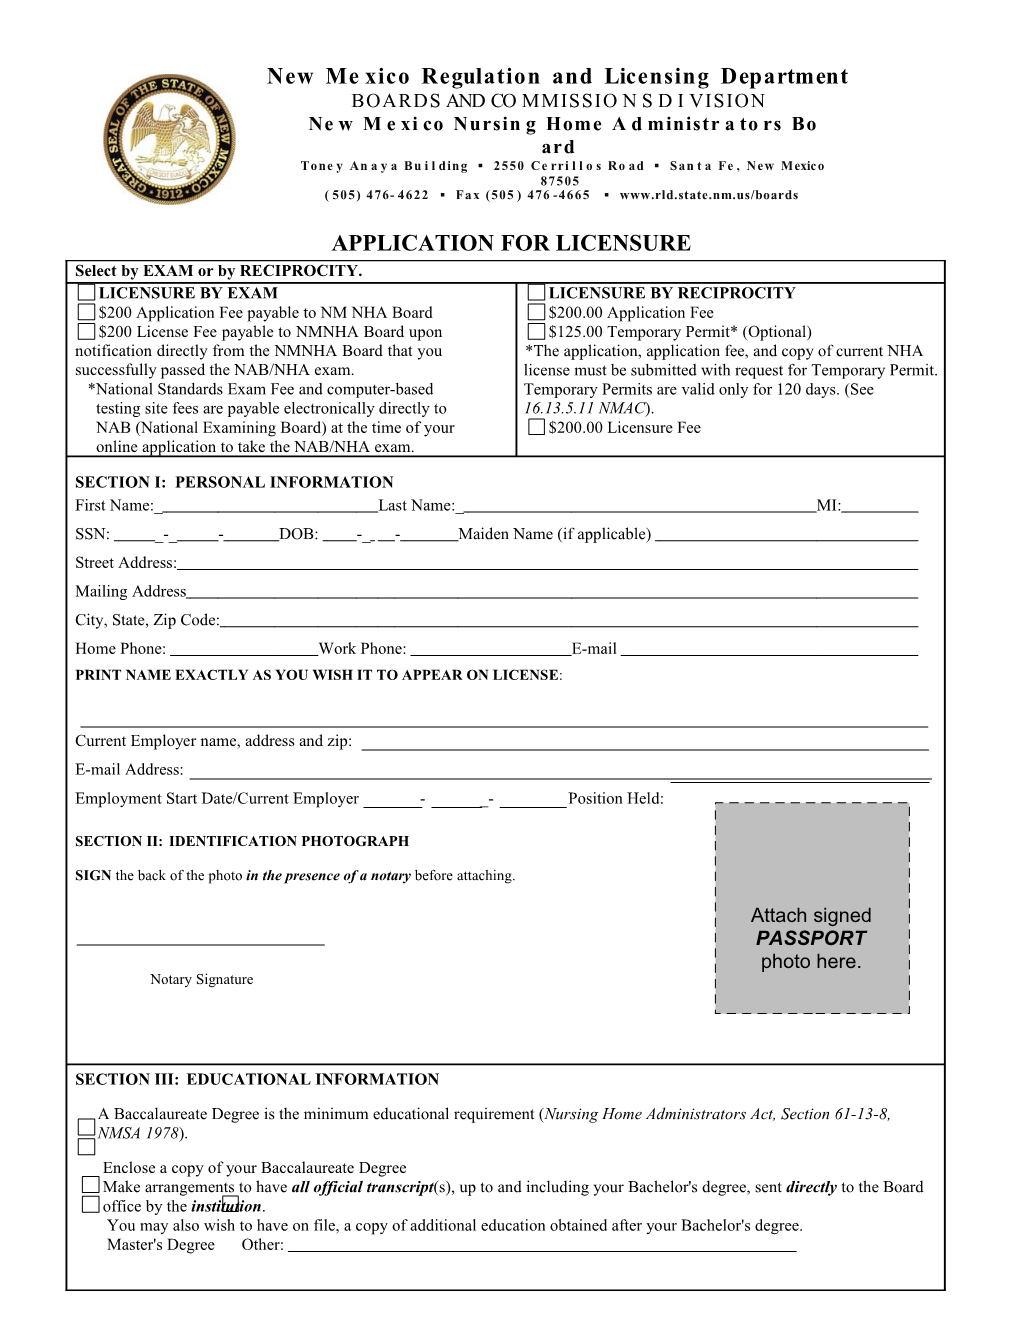 NEW Packet Application Form